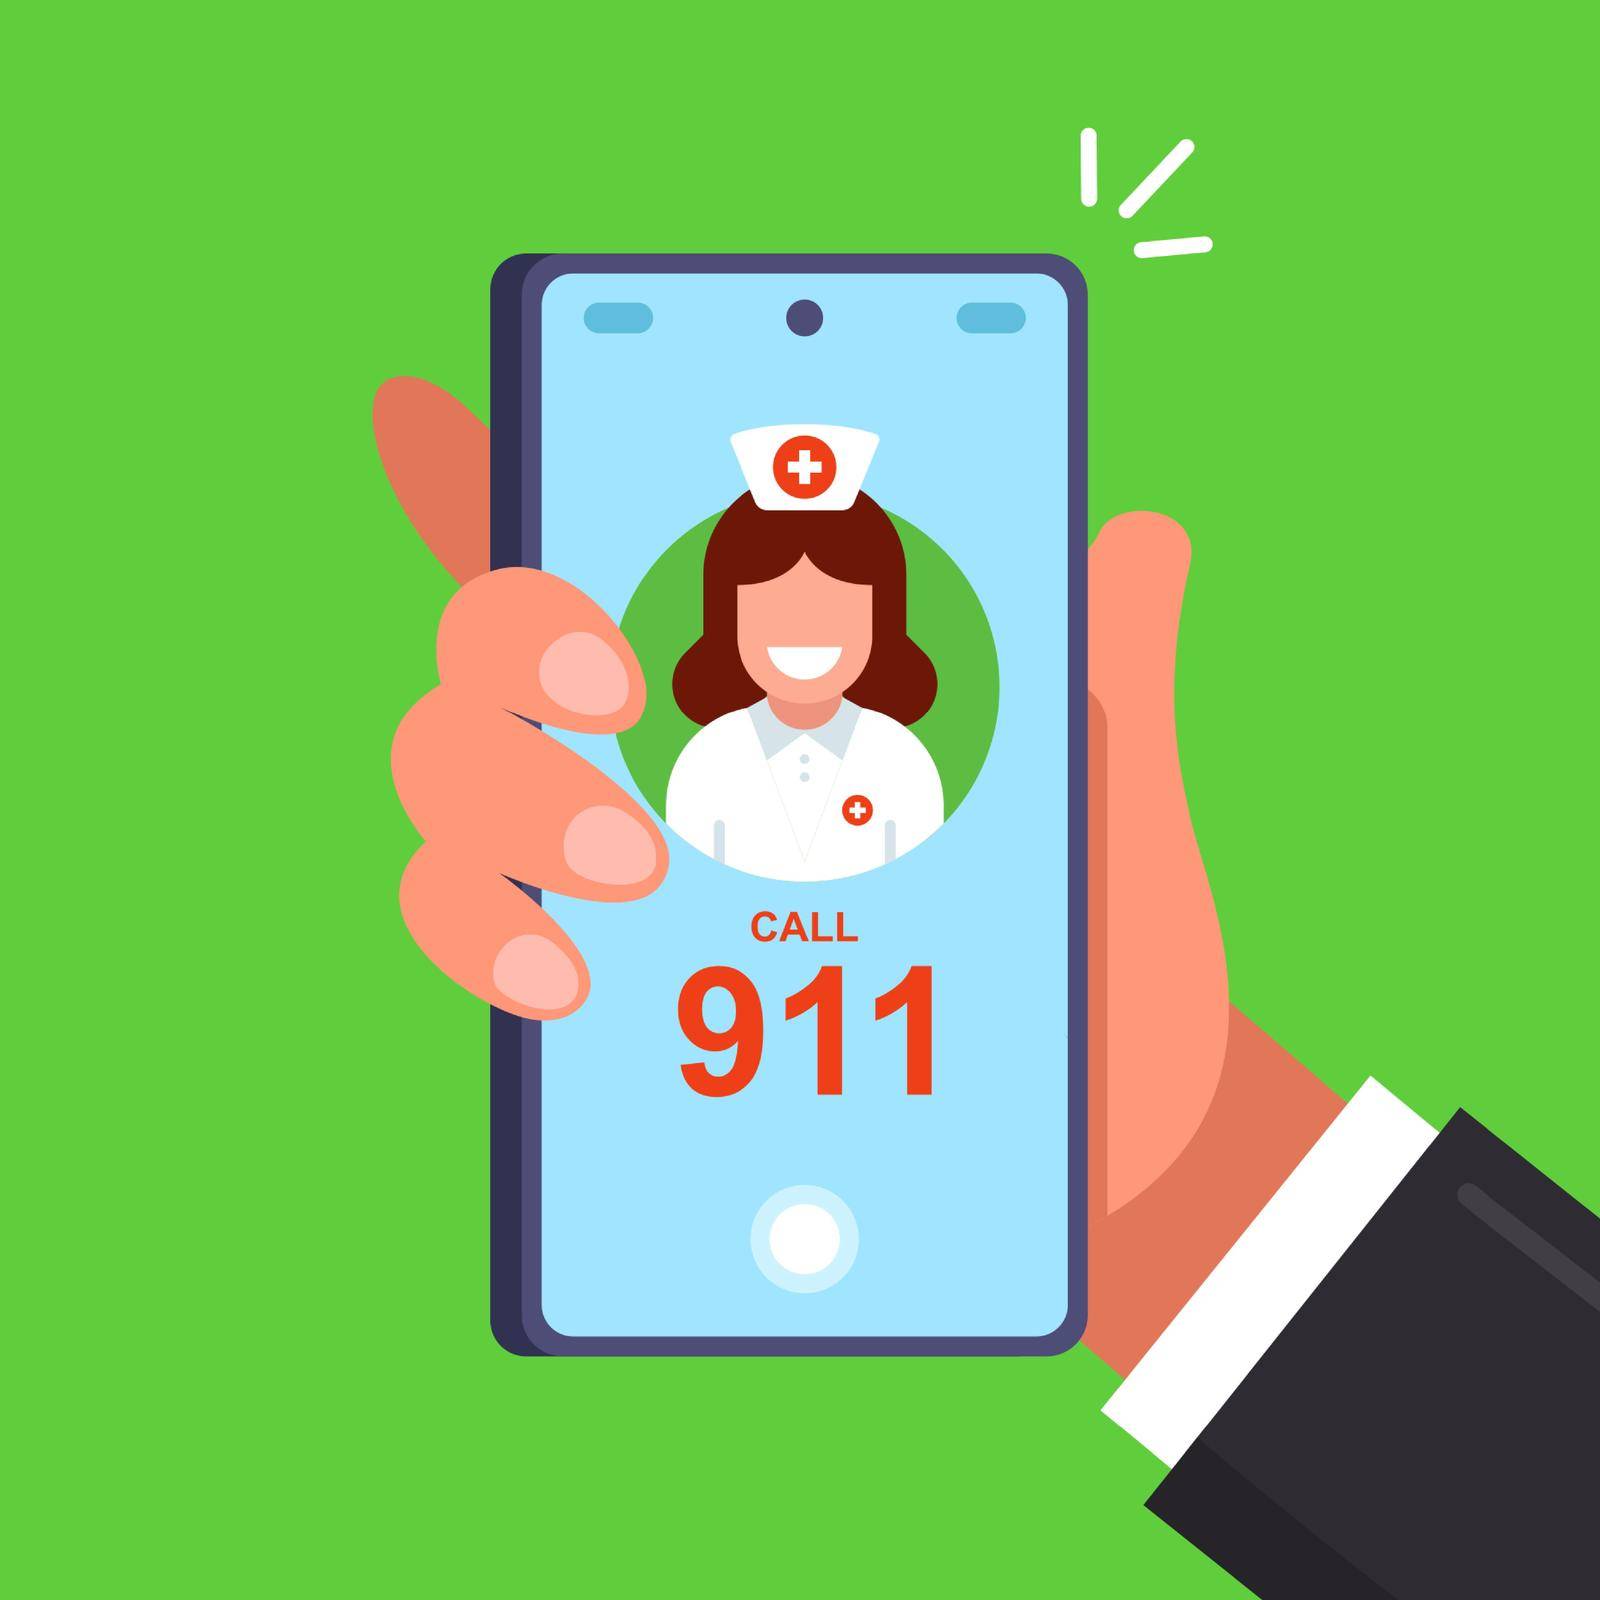 call 911 to call a doctor. flat vector illustration.